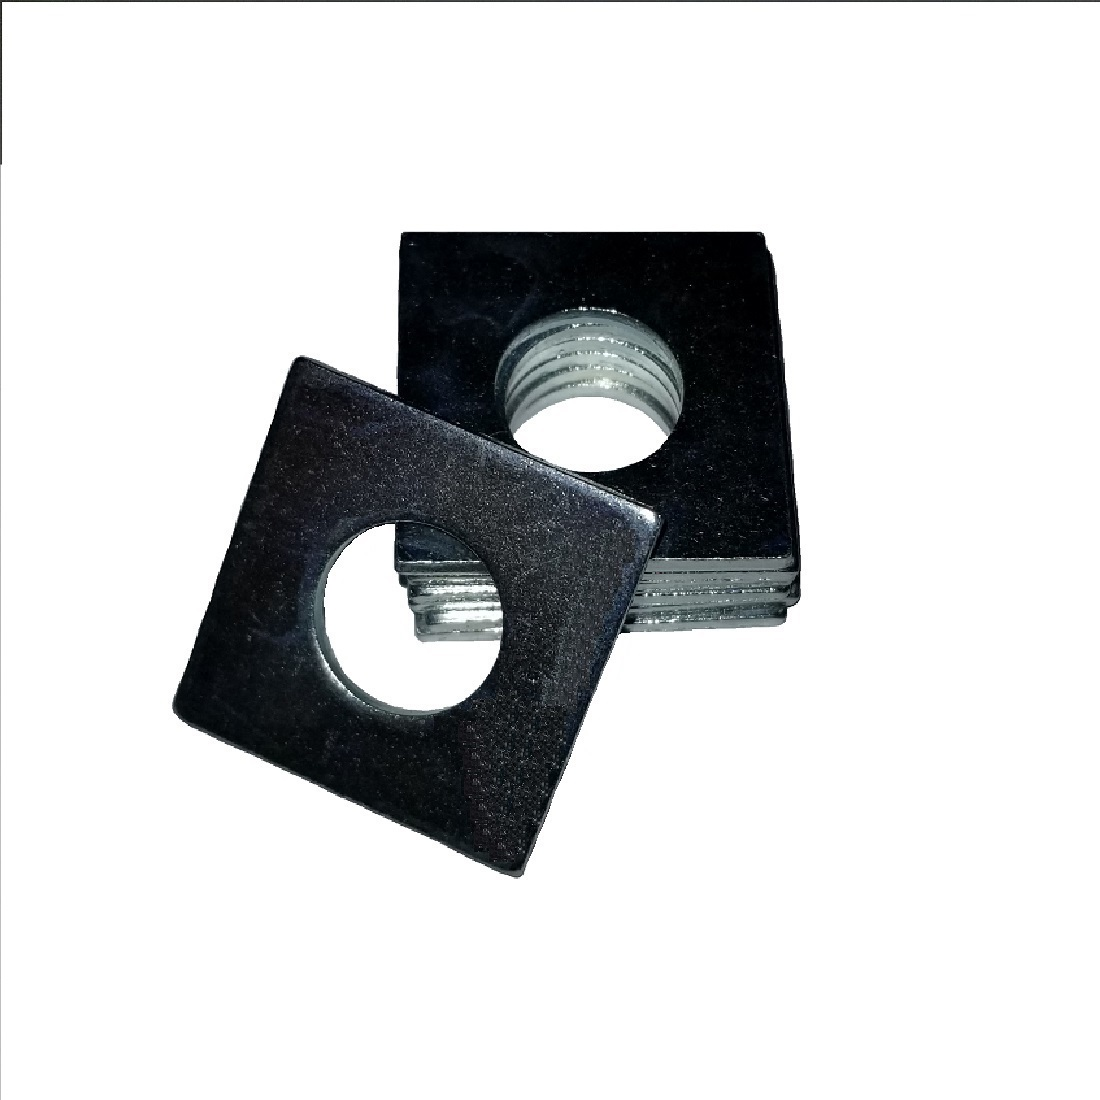 Square OD Washer - 0.656 ID, 2.000 OD, 0.375 Thick, Low Carbon Steel - Soft, Zinc & Clear